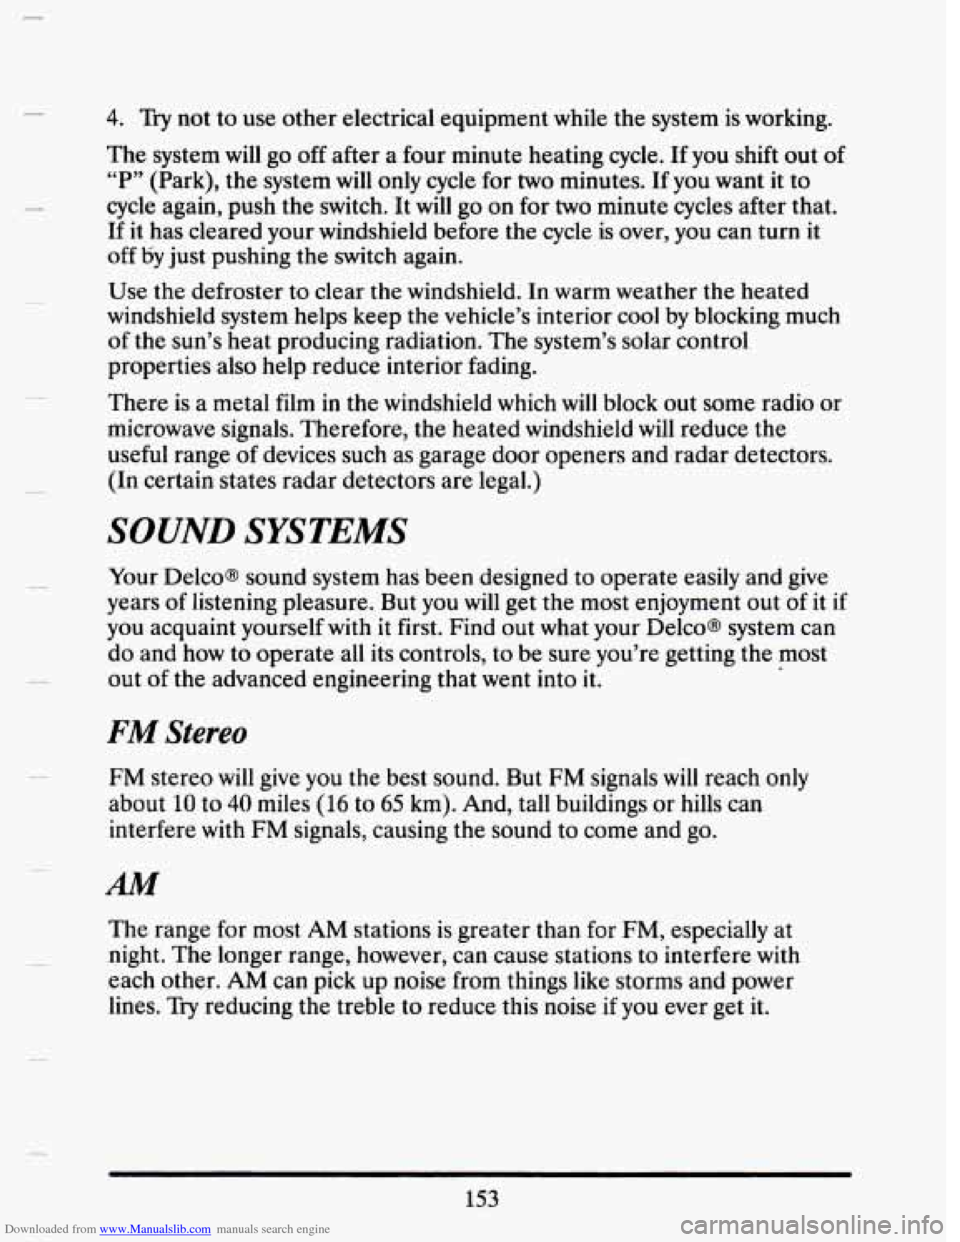 CADILLAC SEVILLE 1993 4.G Owners Manual Downloaded from www.Manualslib.com manuals search engine 4. Try not  to use other  electrical  equipment  while the system  is  working. 
The  system  will go 
off after a four  minute  heating  cycle